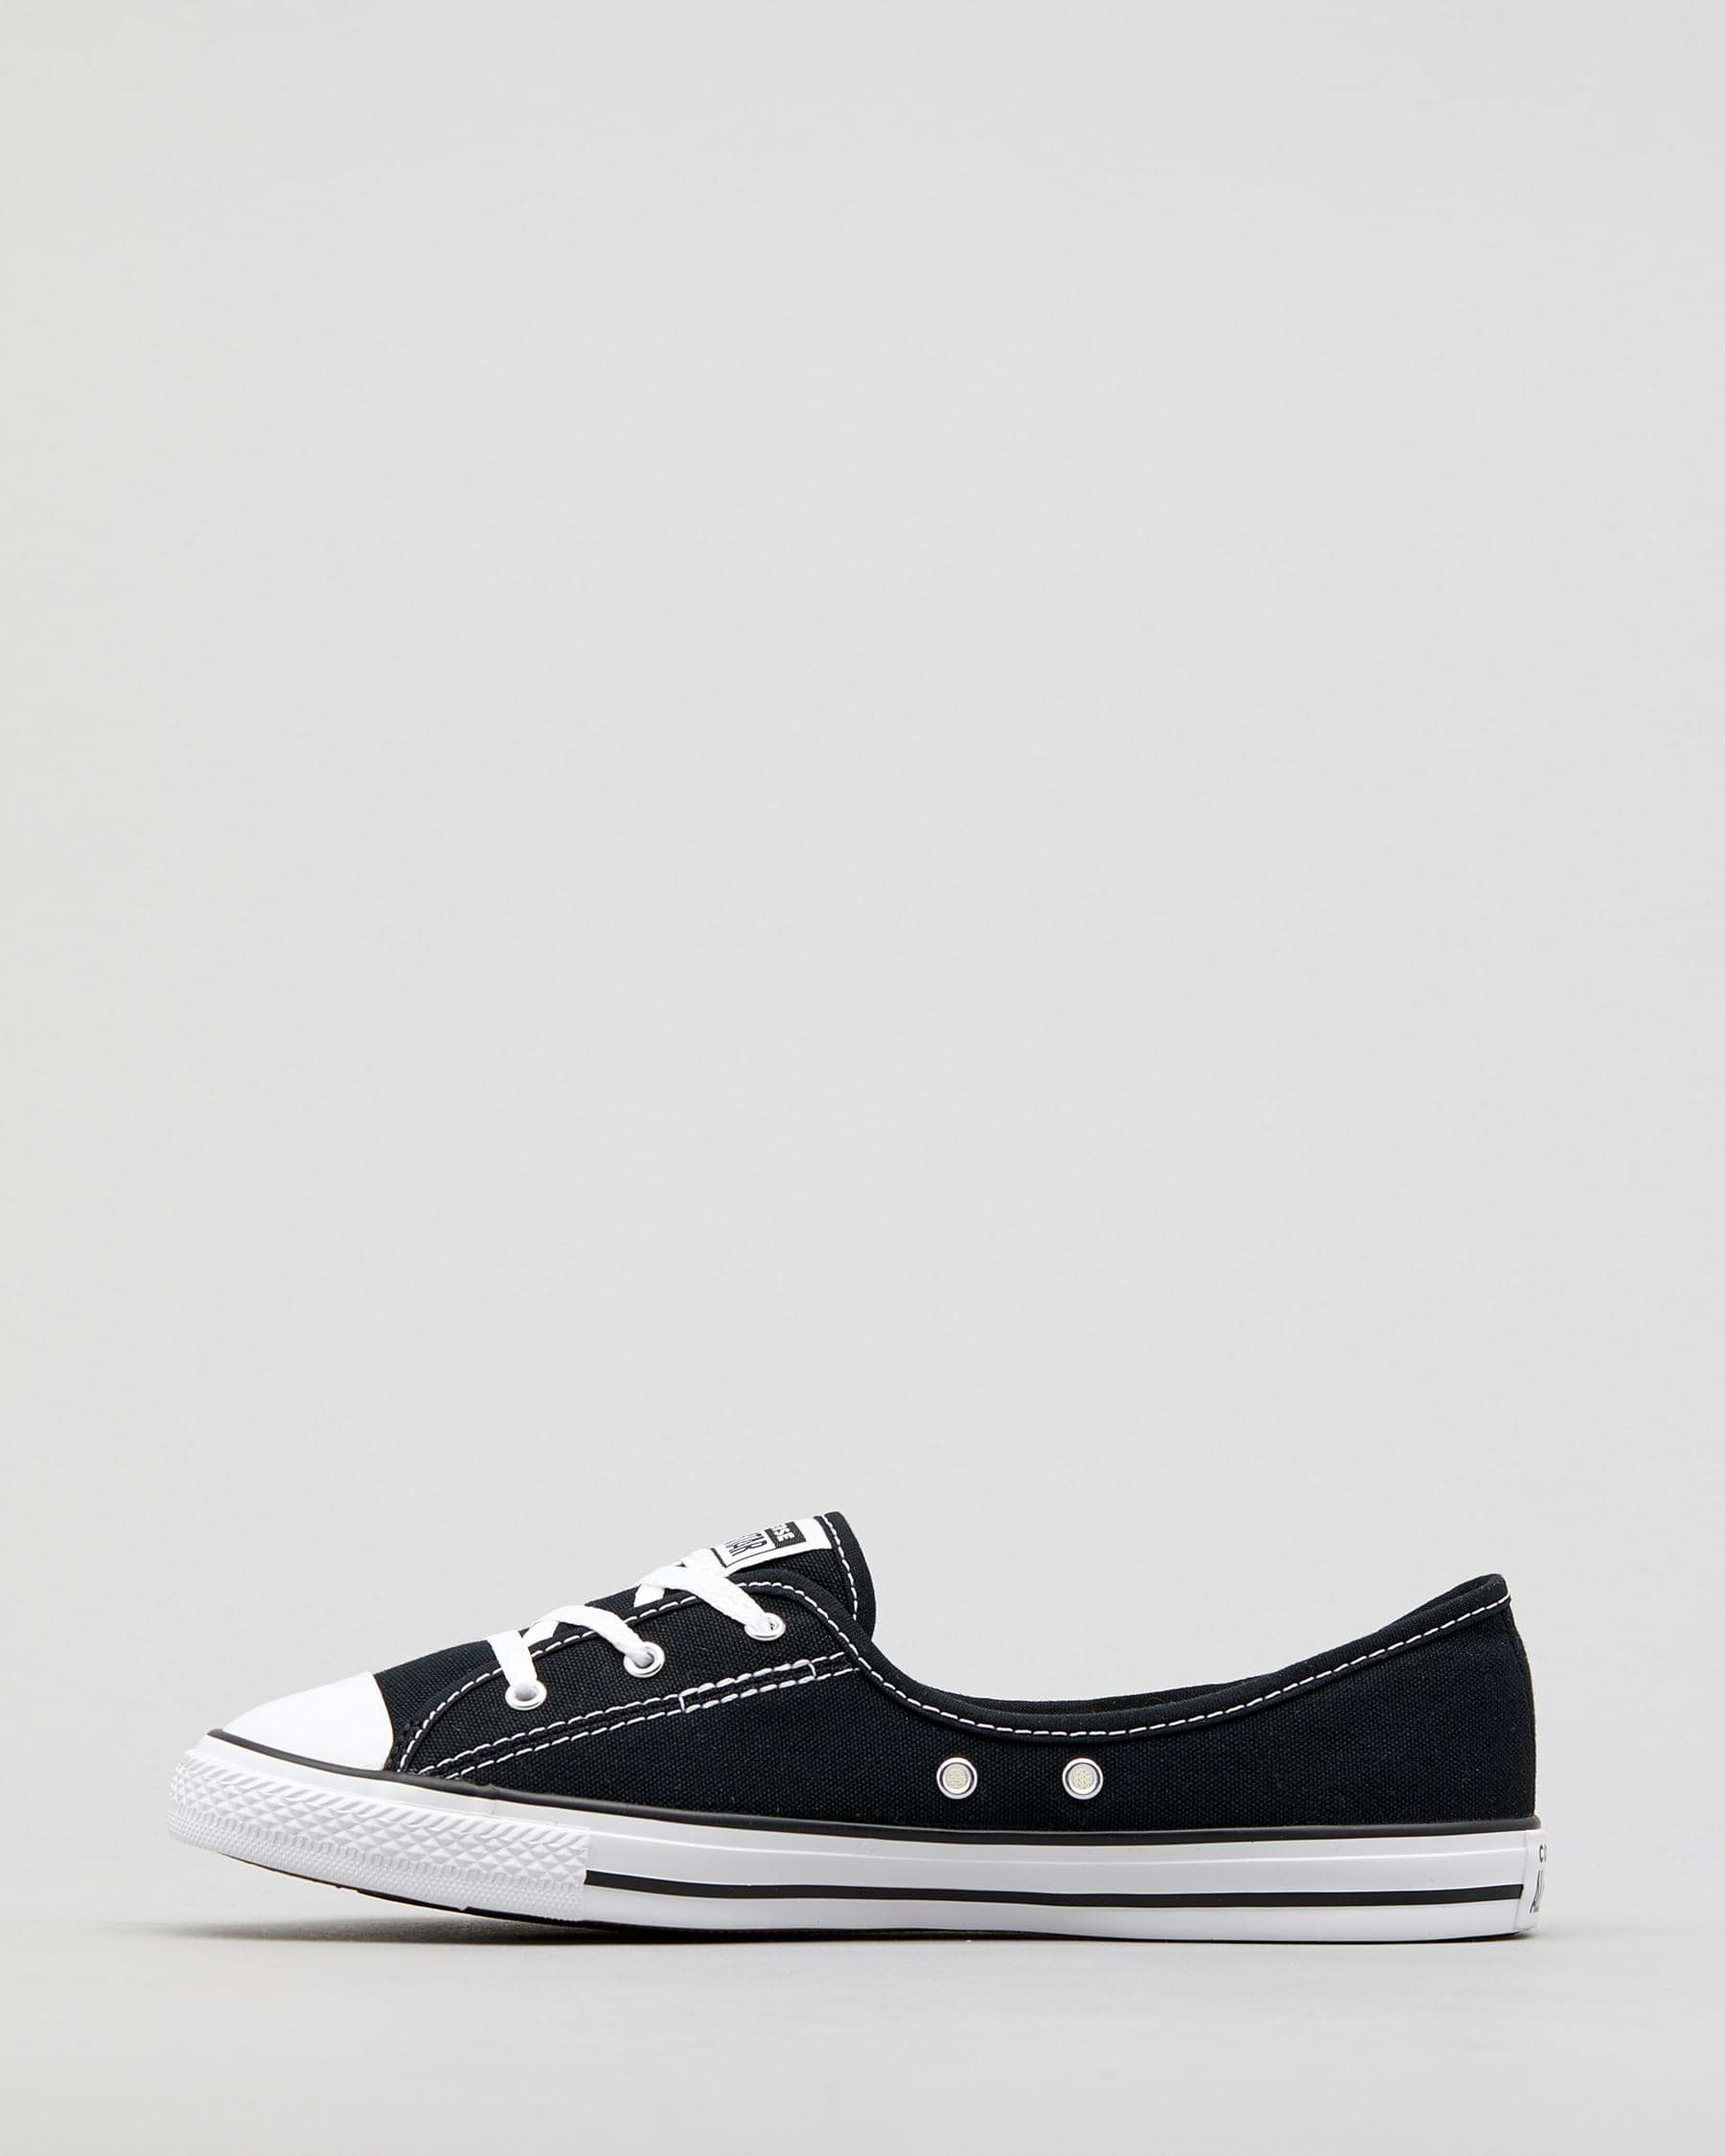 Womens Chuck Taylor Lace Low In Black/white/black - Fast Shipping & Easy Returns City Beach United States